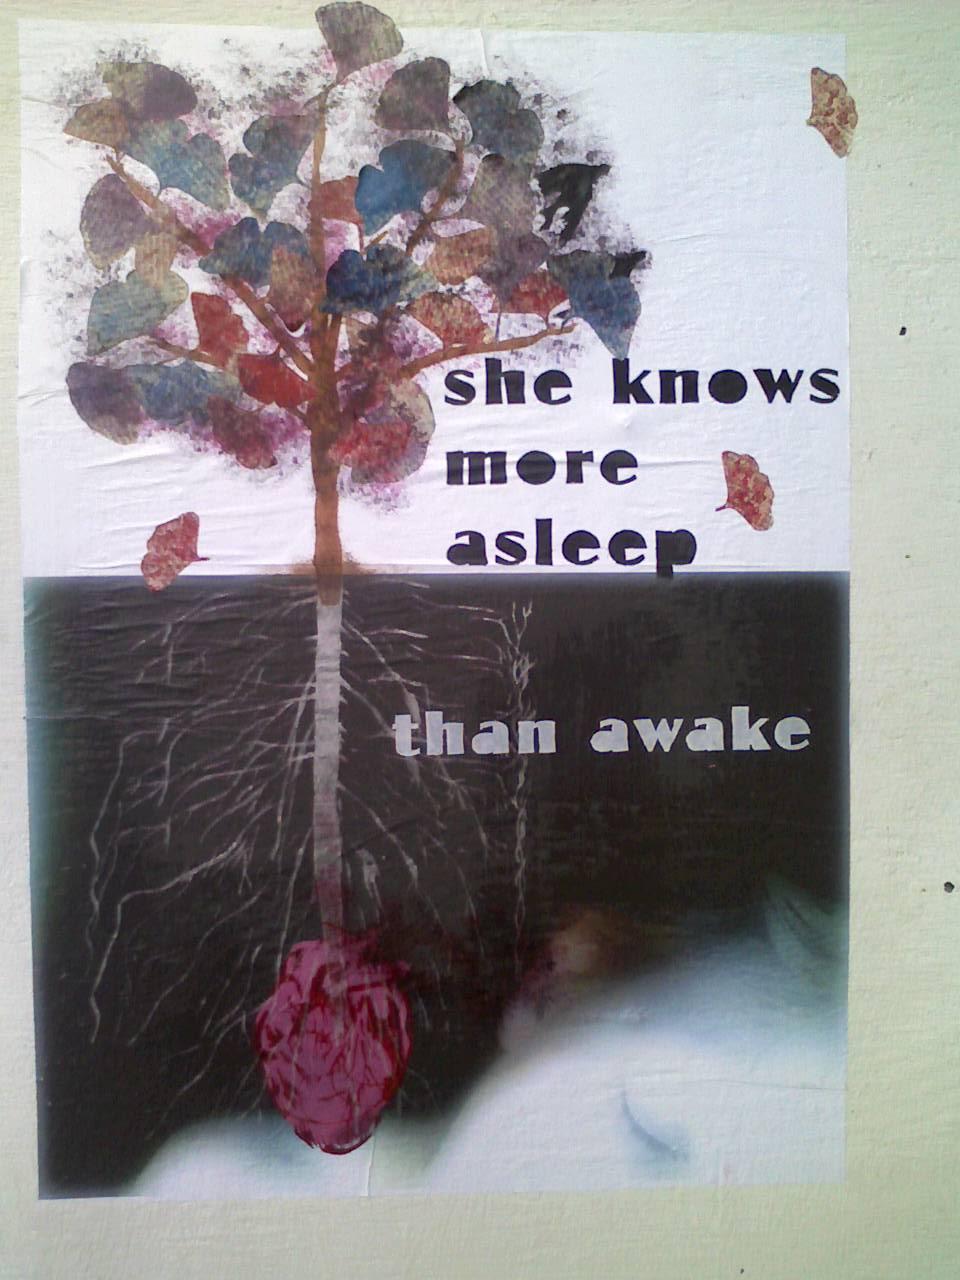 street art of a tree growing out of a heart next to the words, "she knows more asleep than awake"